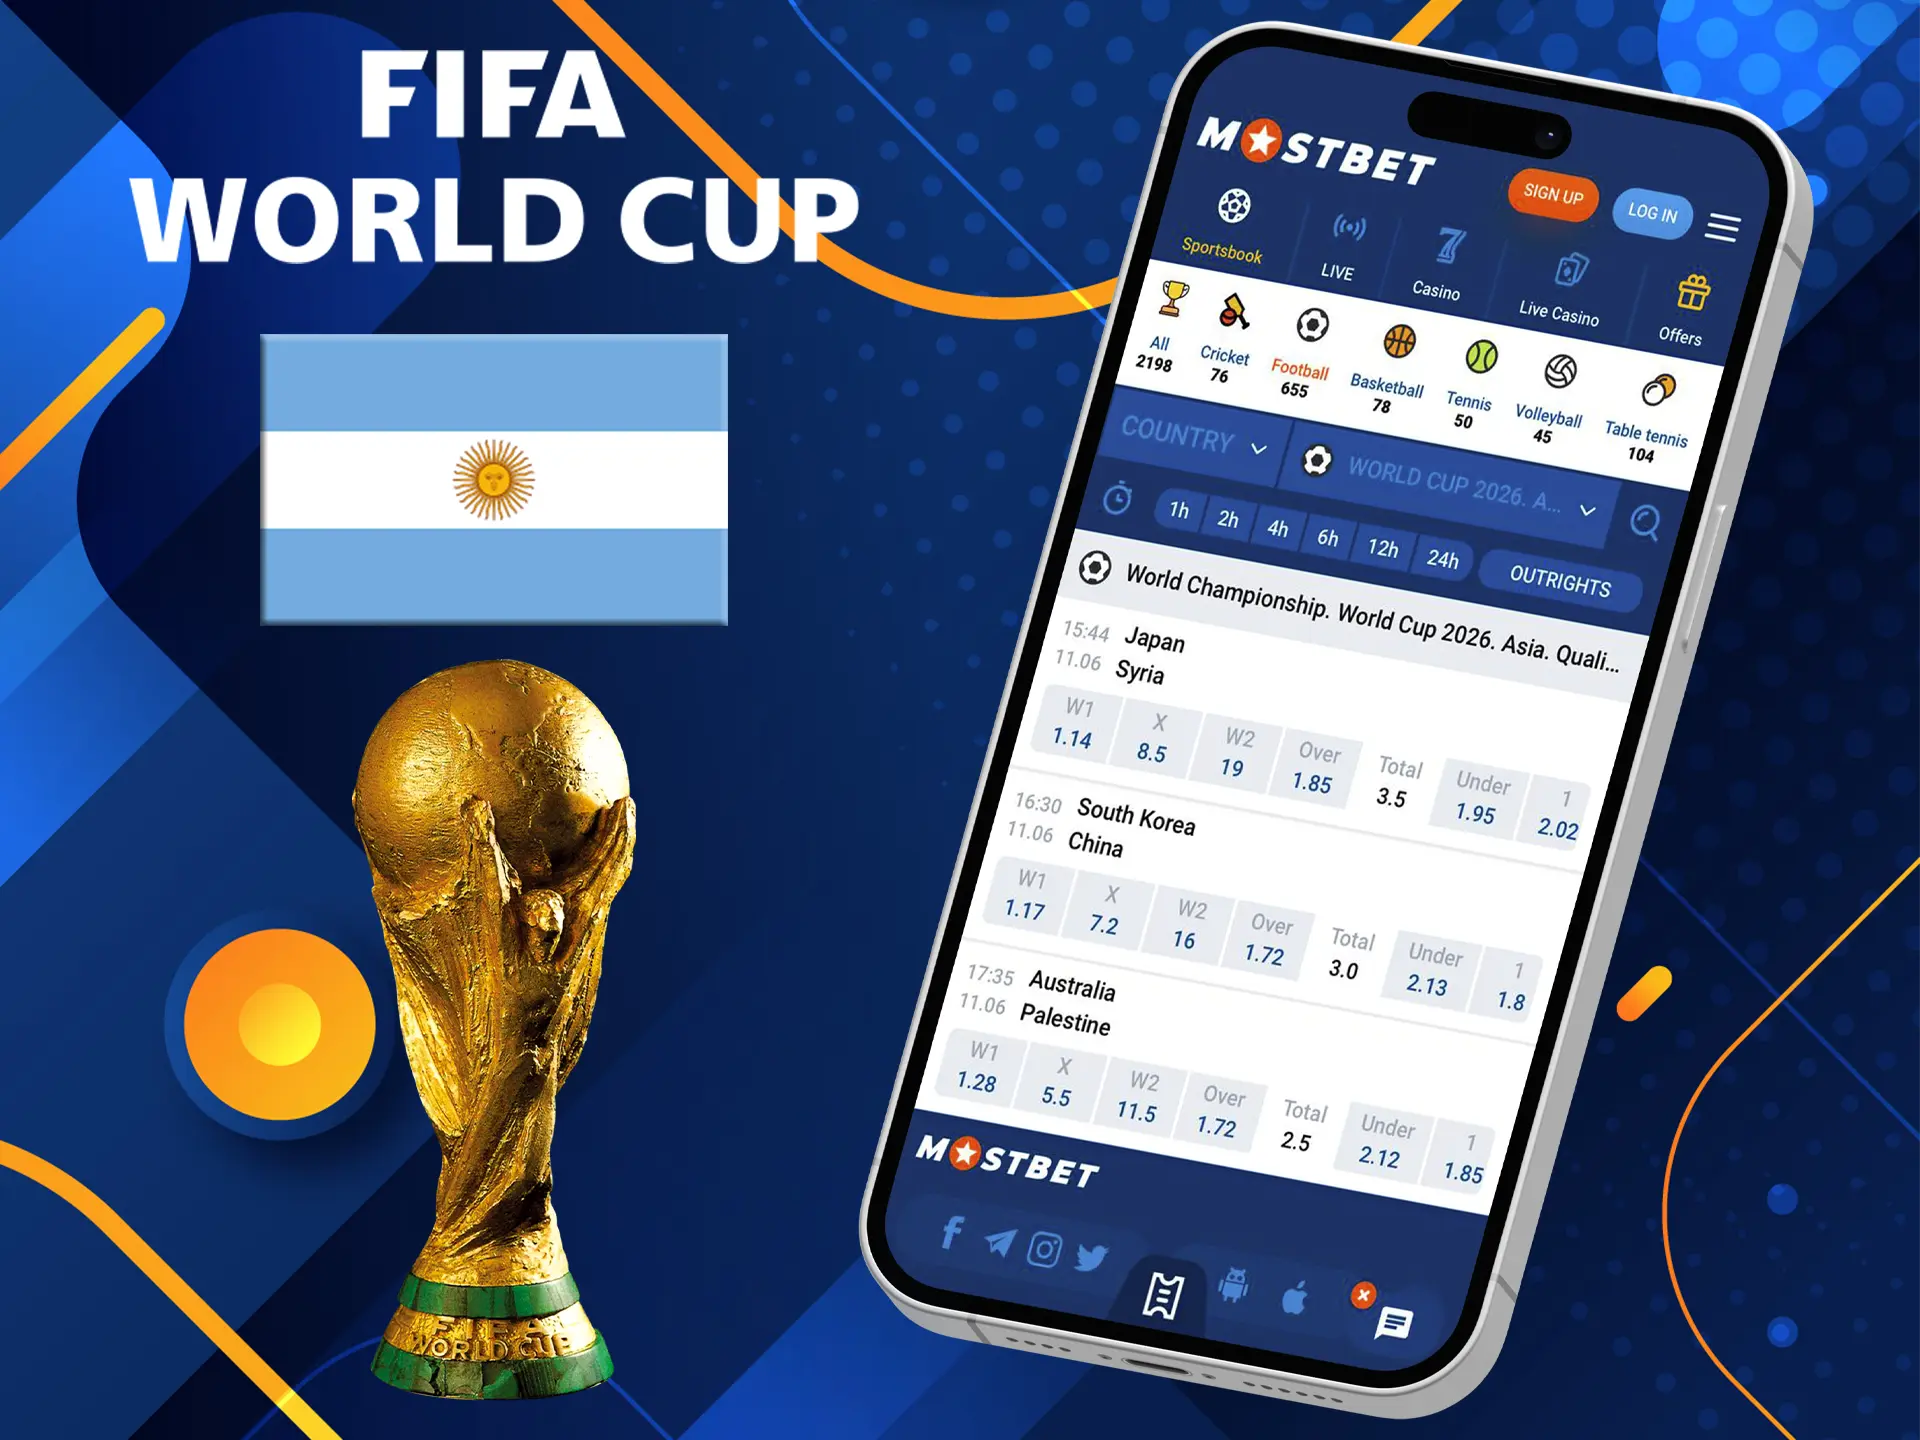 Cheer on your national team at the World Cup and don't forget to make accurate match predictions.